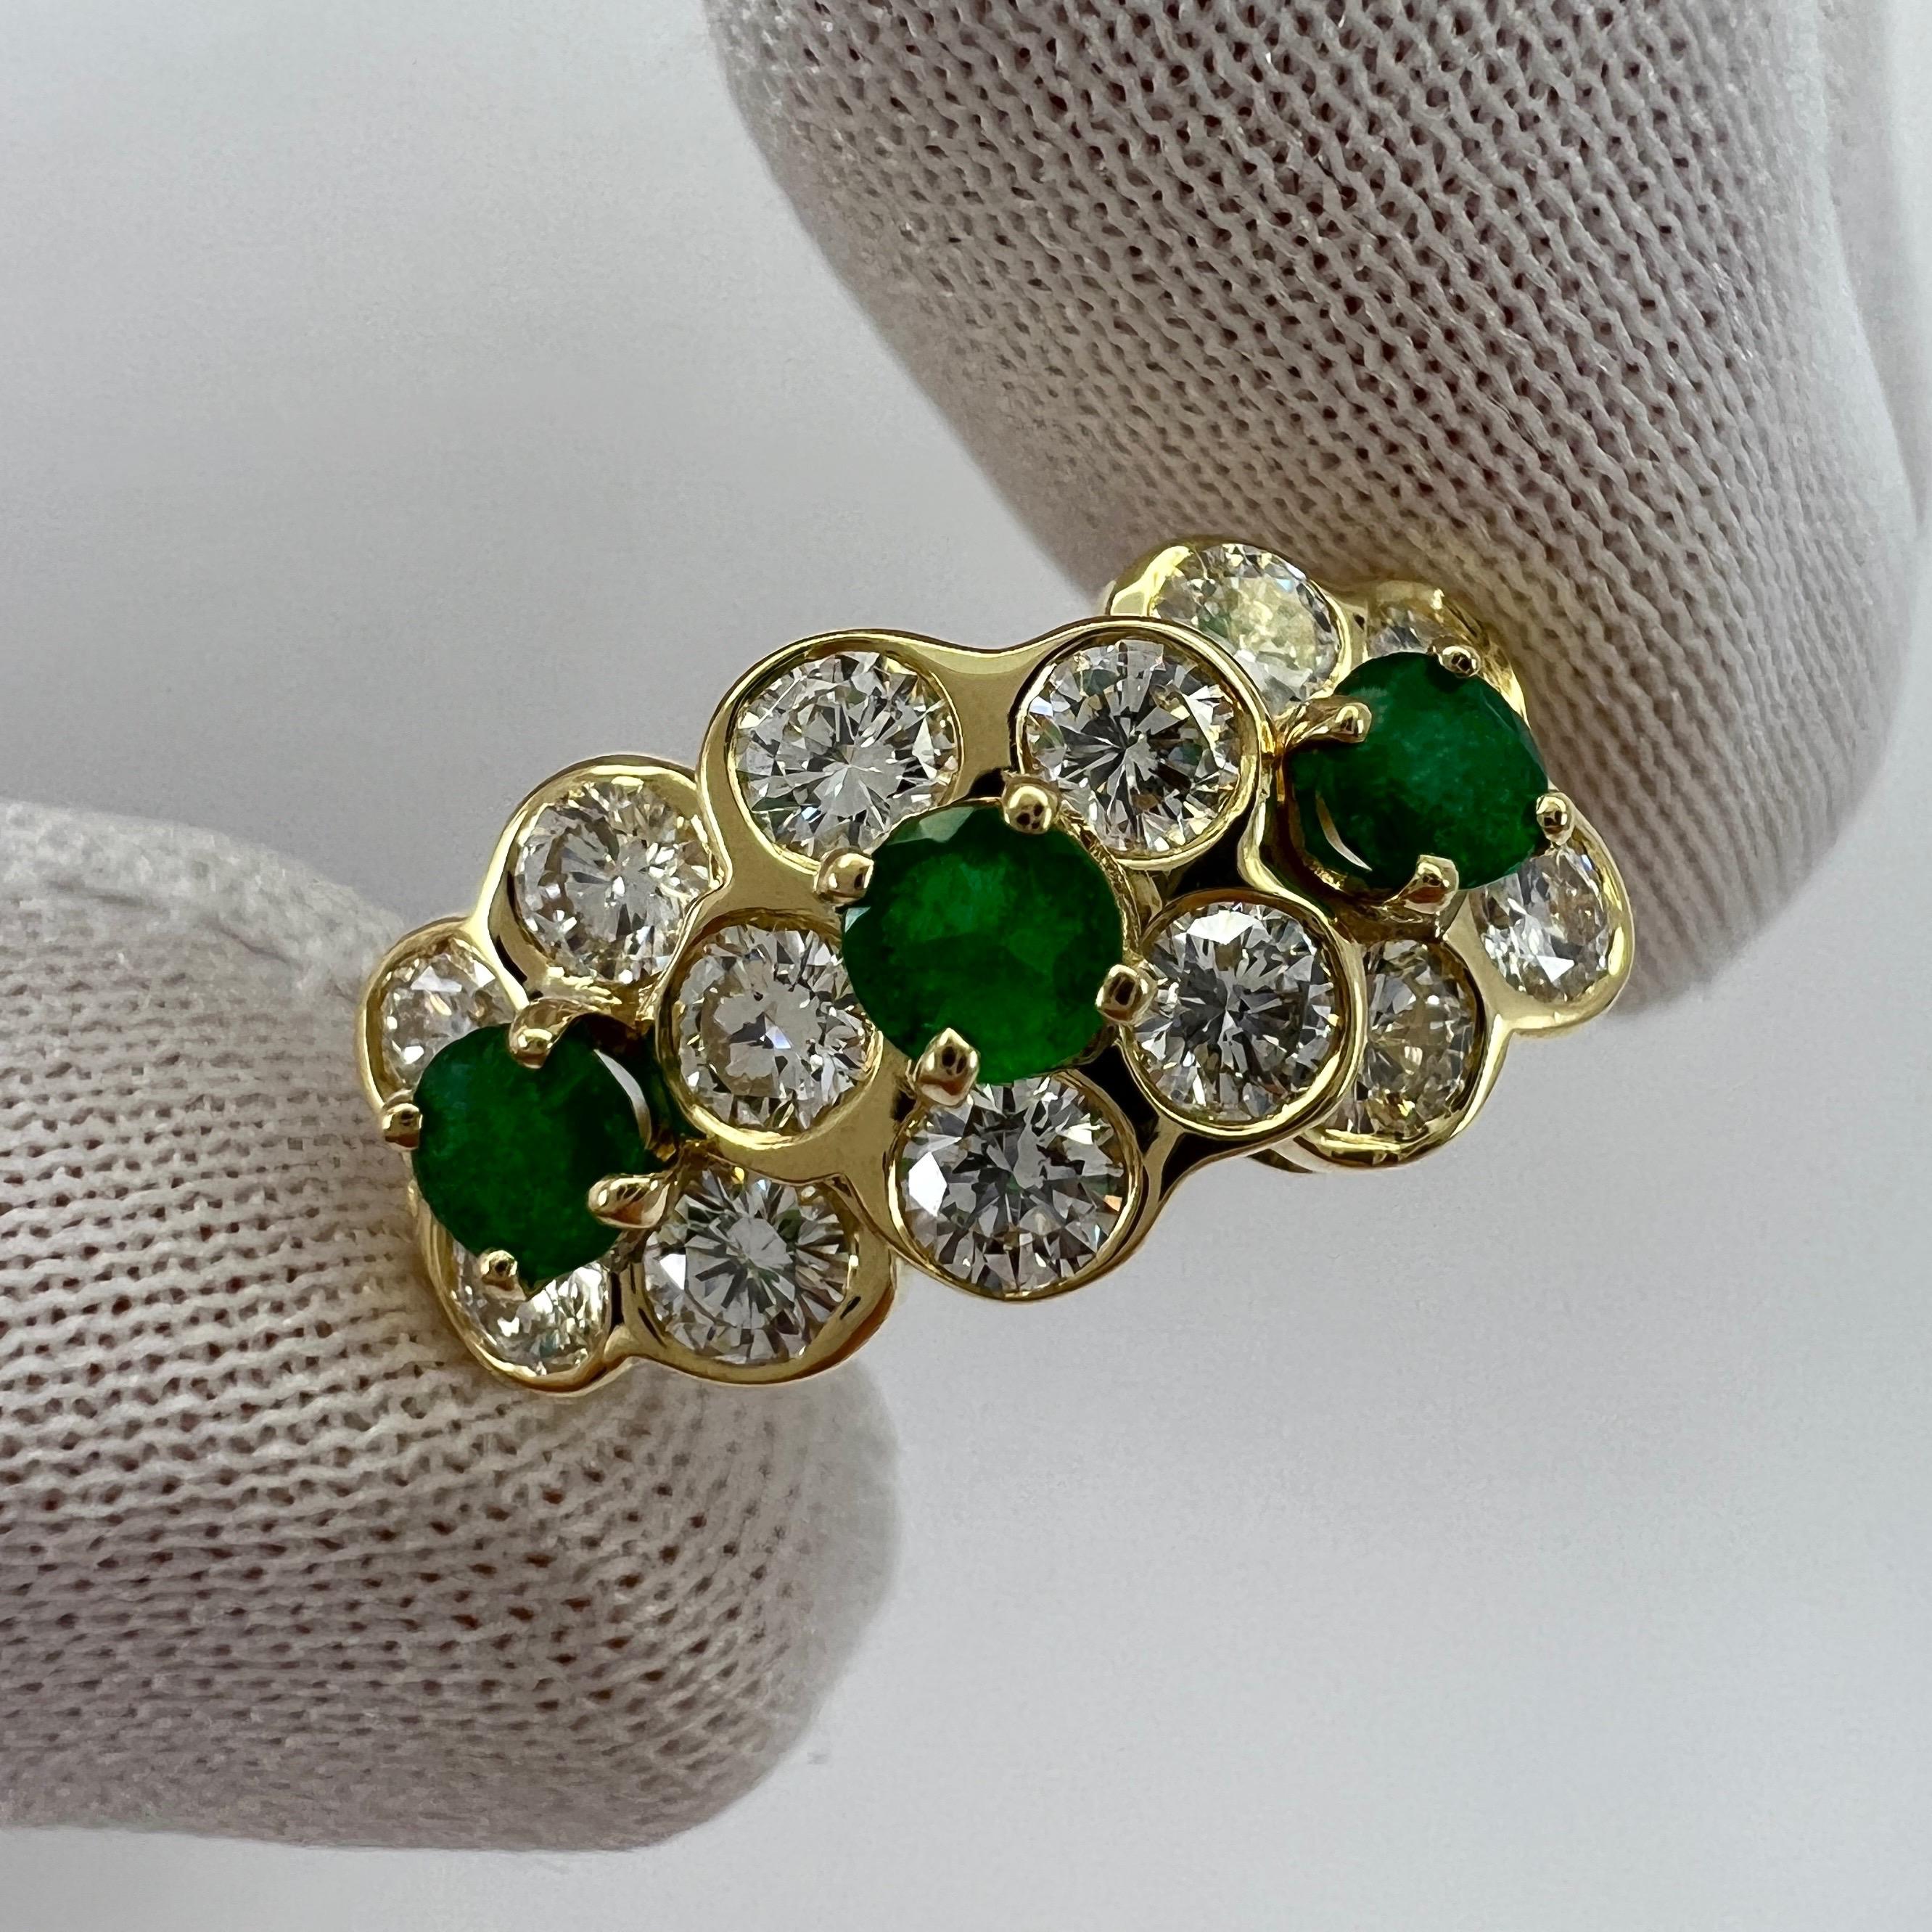 Fine Vintage Van Cleef & Arpels Emerald And Diamond 18k Yellow Gold Fleurette Flower Ring.

A stunning vintage ring with a unique floral design typical of Van Cleef & Arpels, set with beautiful natural round cut green emeralds and diamonds in a